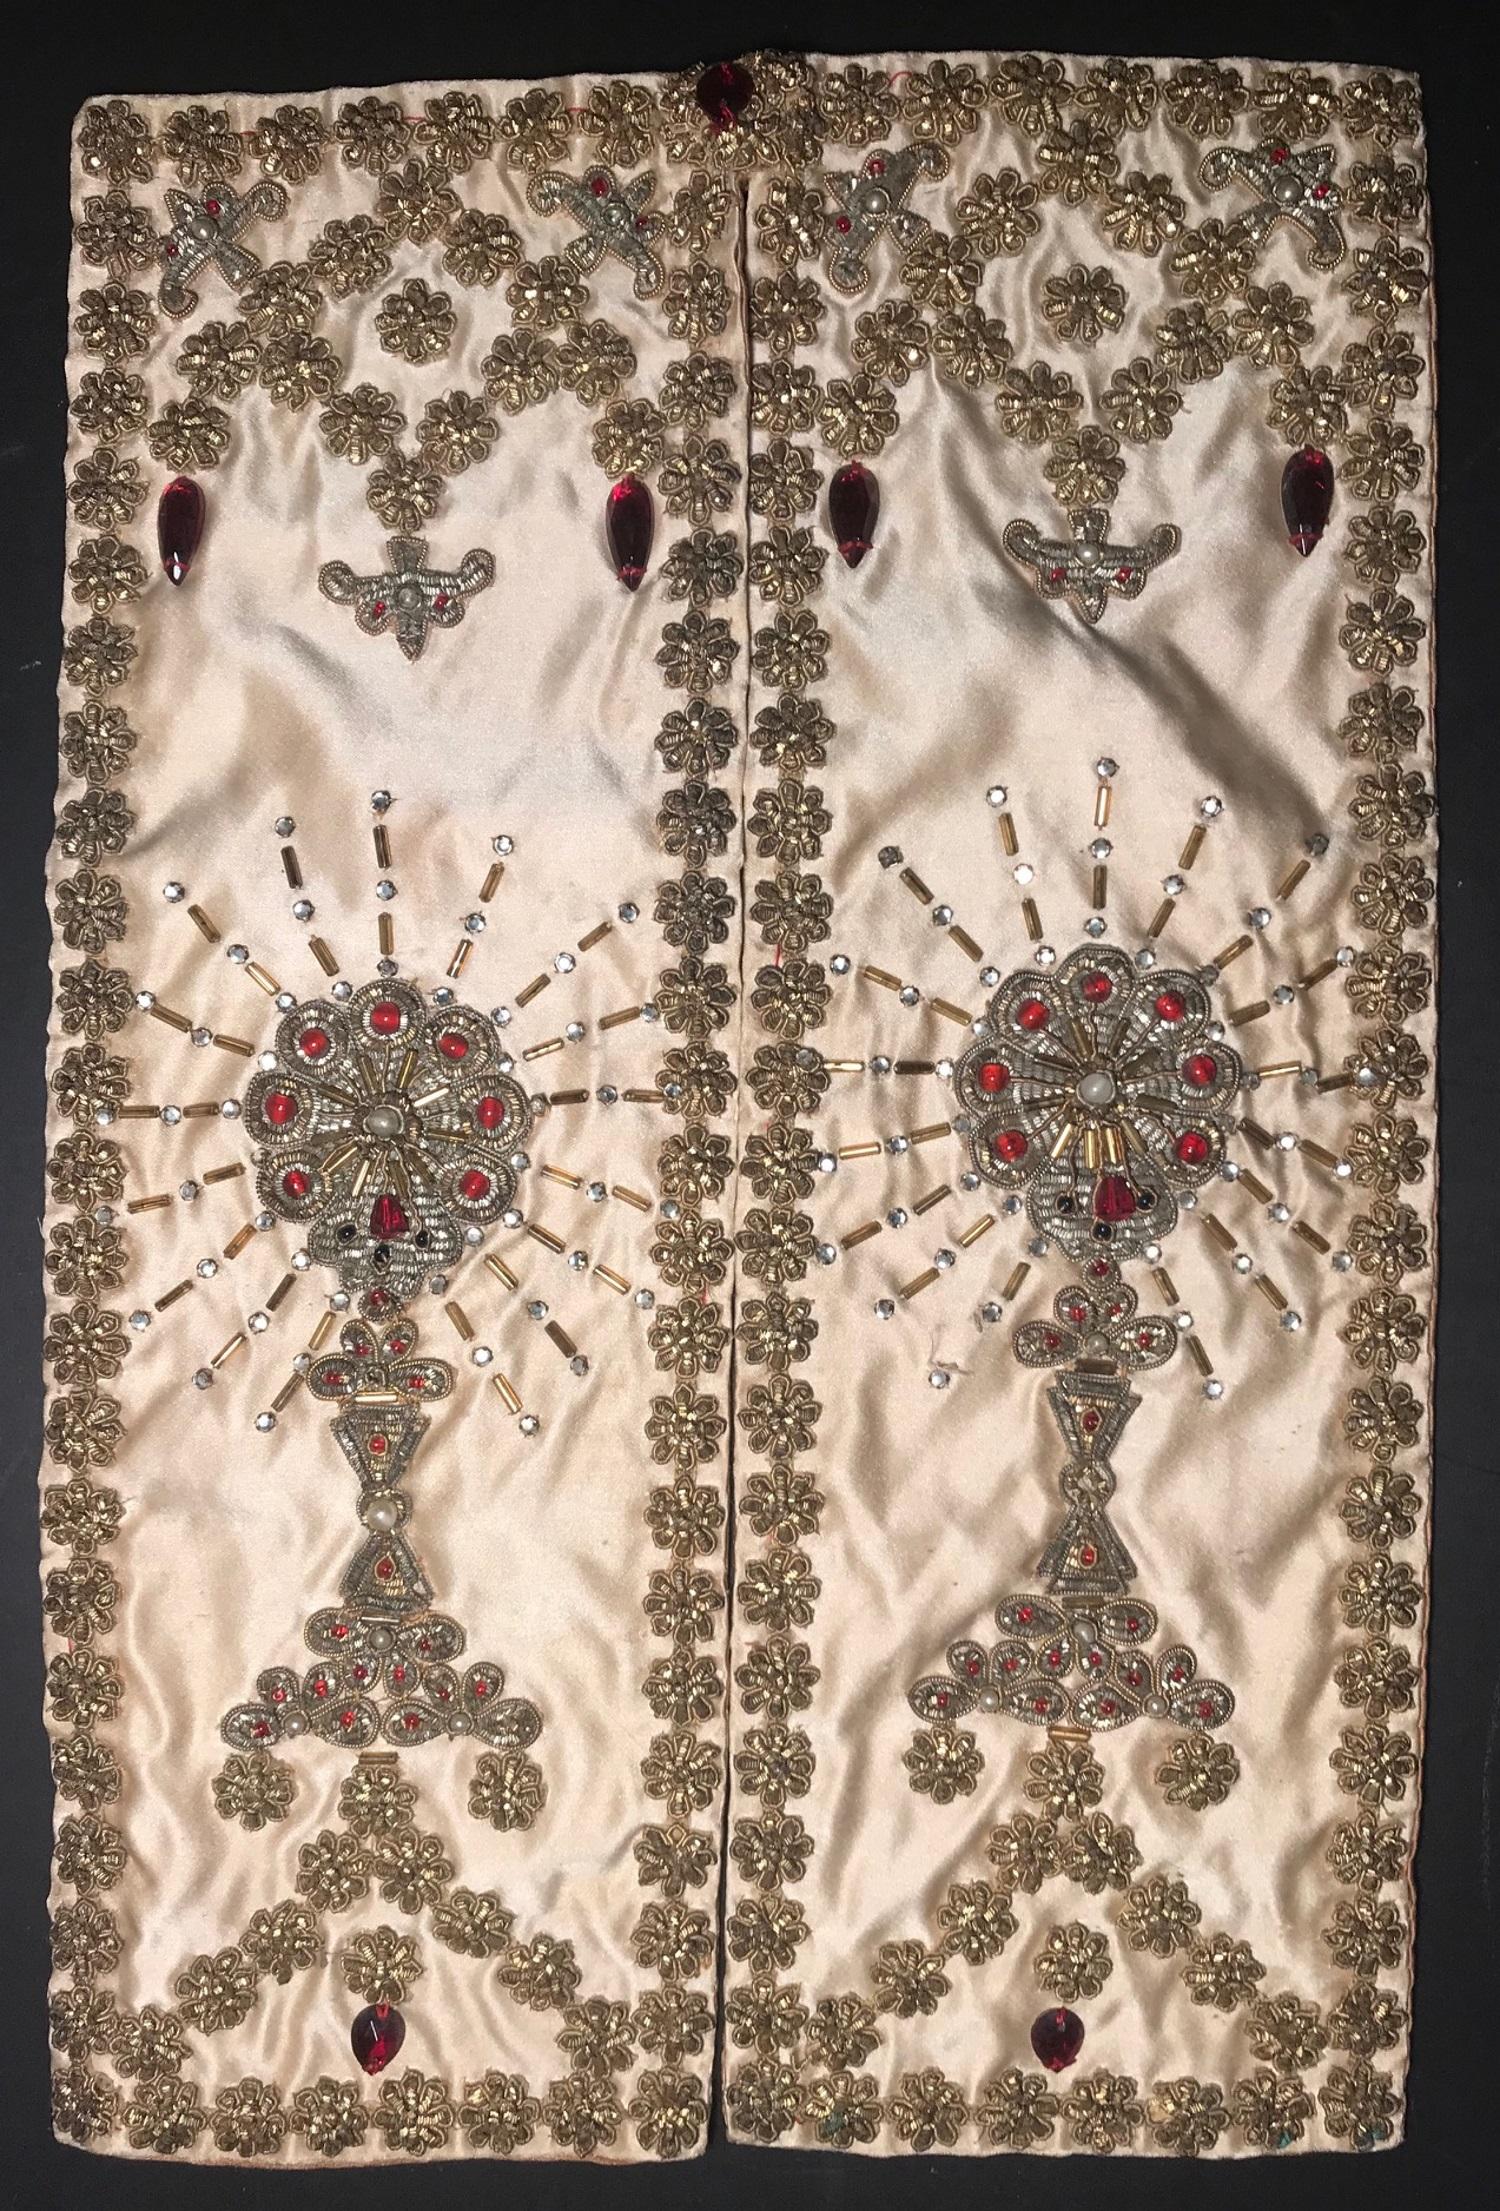 This is a stunning ecclesiastical hand worked chalice veil. The exquisite gold metallic embroidery and beadwork on cream colored silk make it a very fine devotional piece of textile. Each panel centers a ciborium embroidered in gilt metal threads